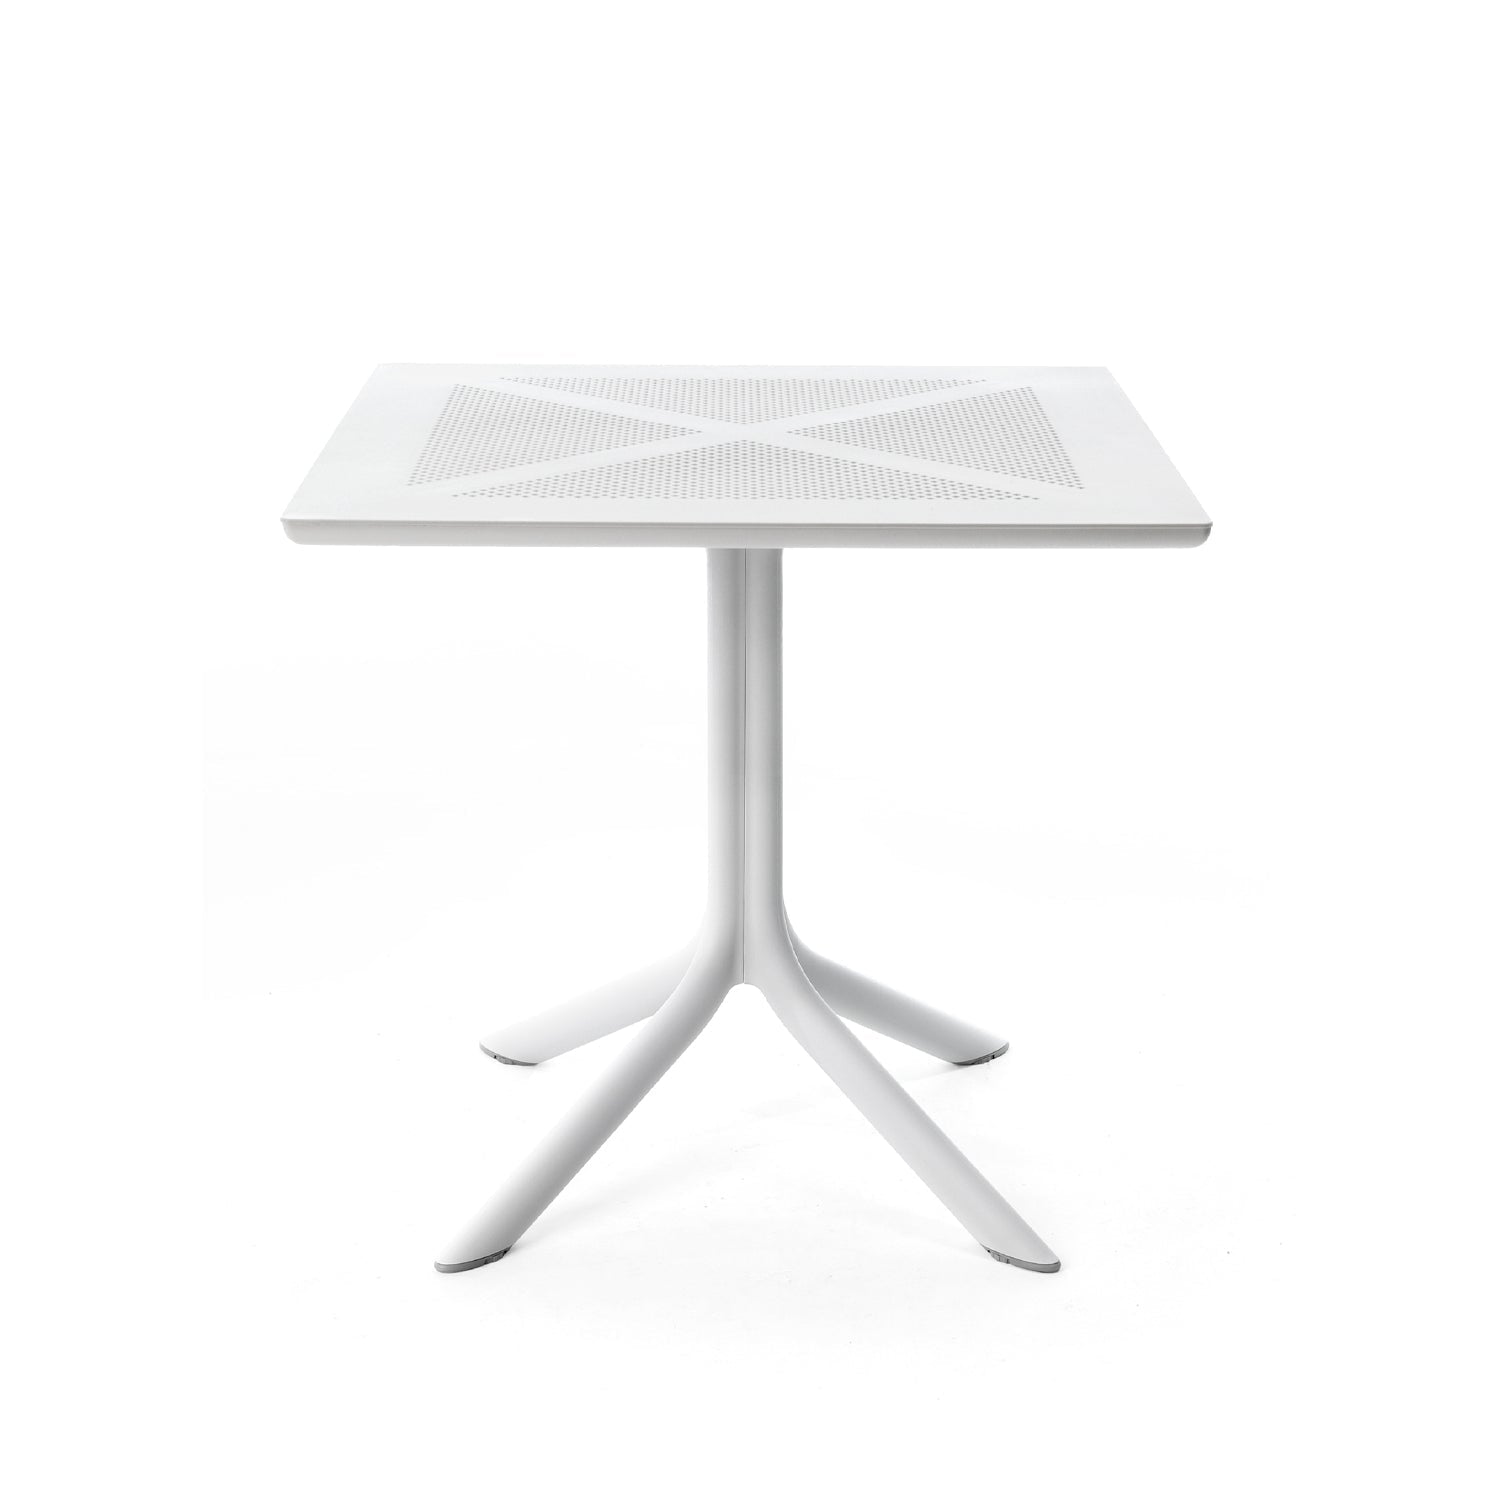 ClipX 70 Garden Table By Nardi In White